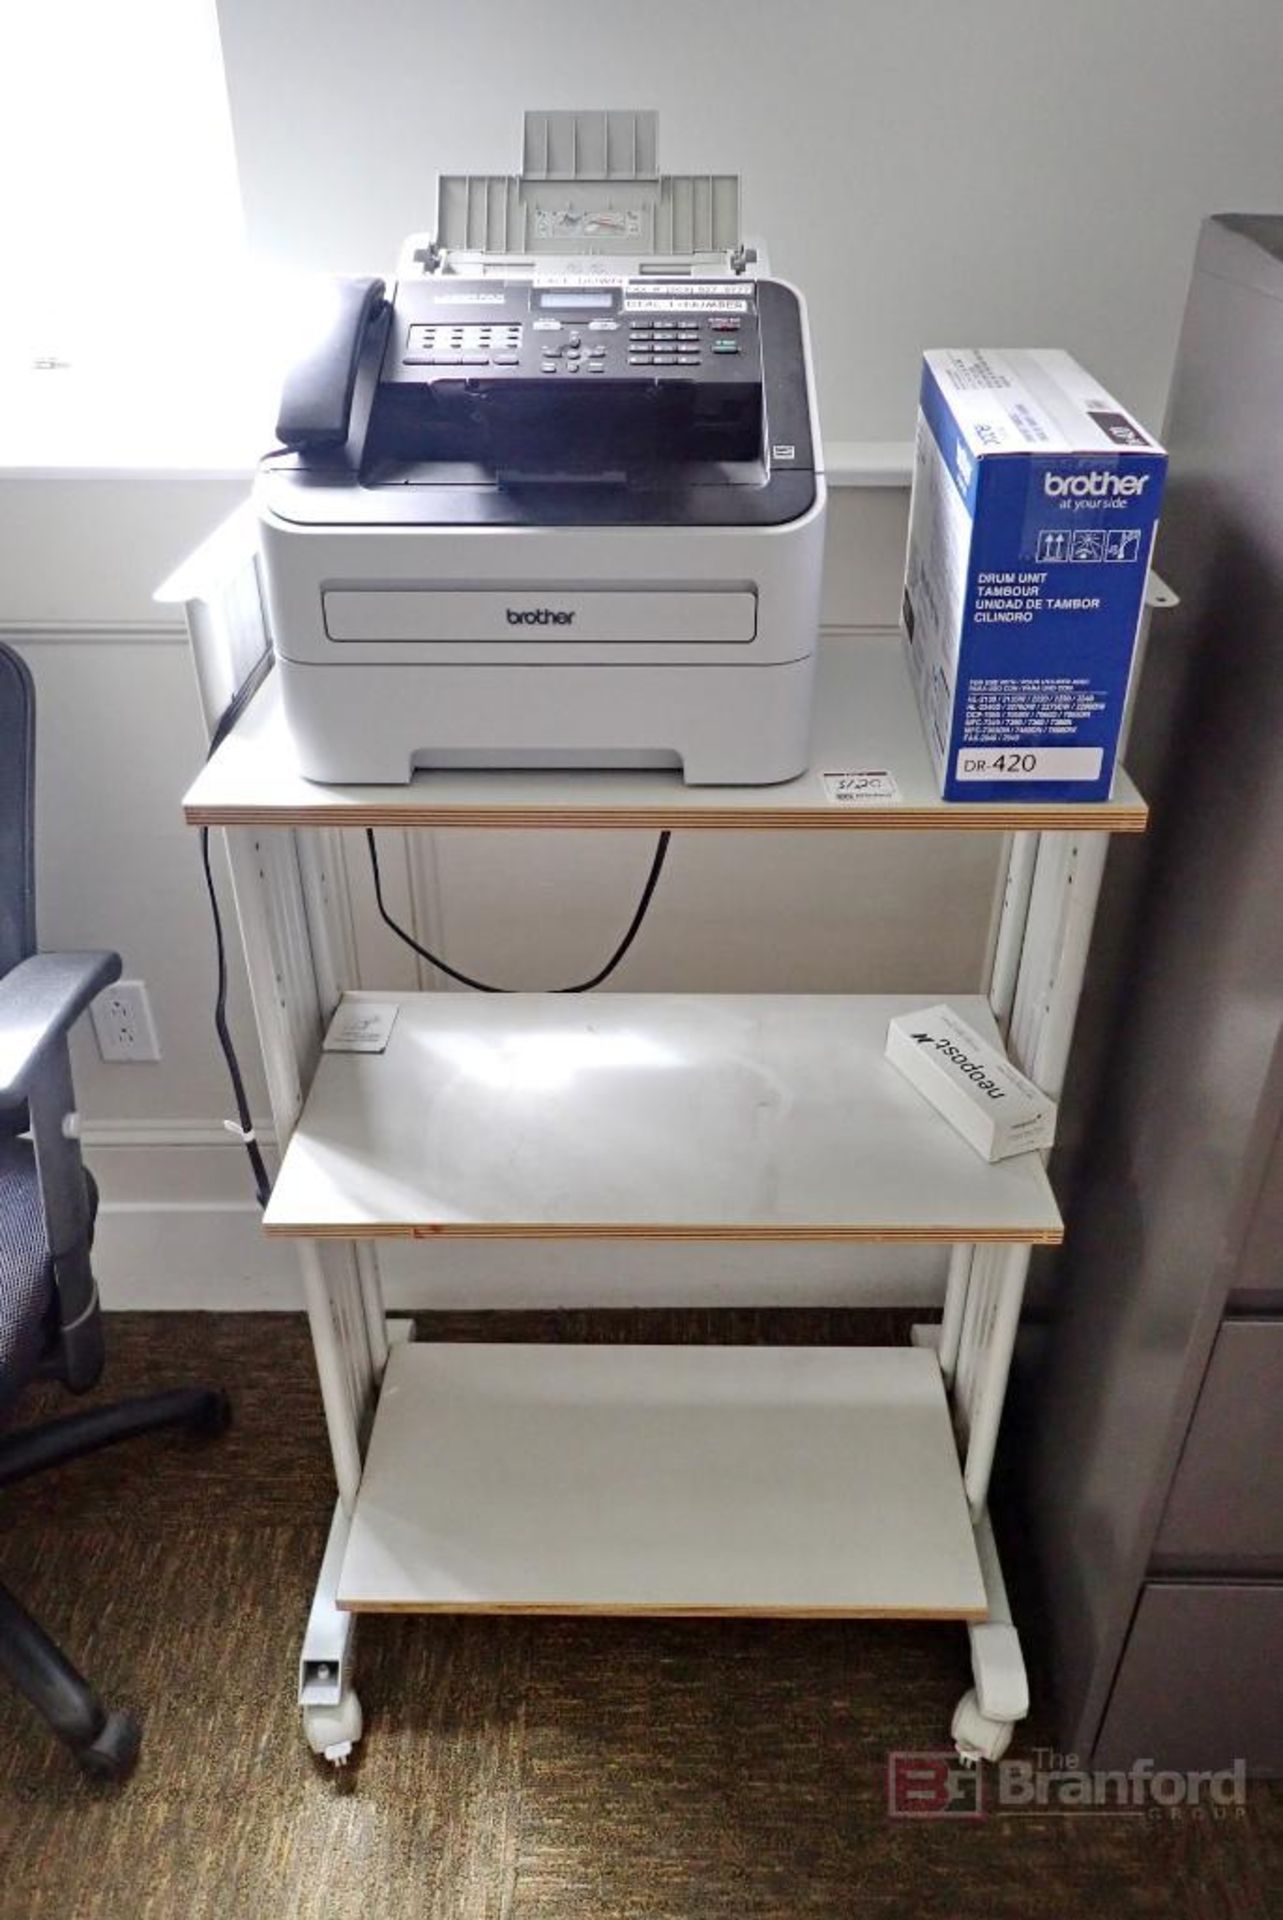 Brother IntelliFAX 2940 Fax w/ DR-420 Drum Unit & Cart